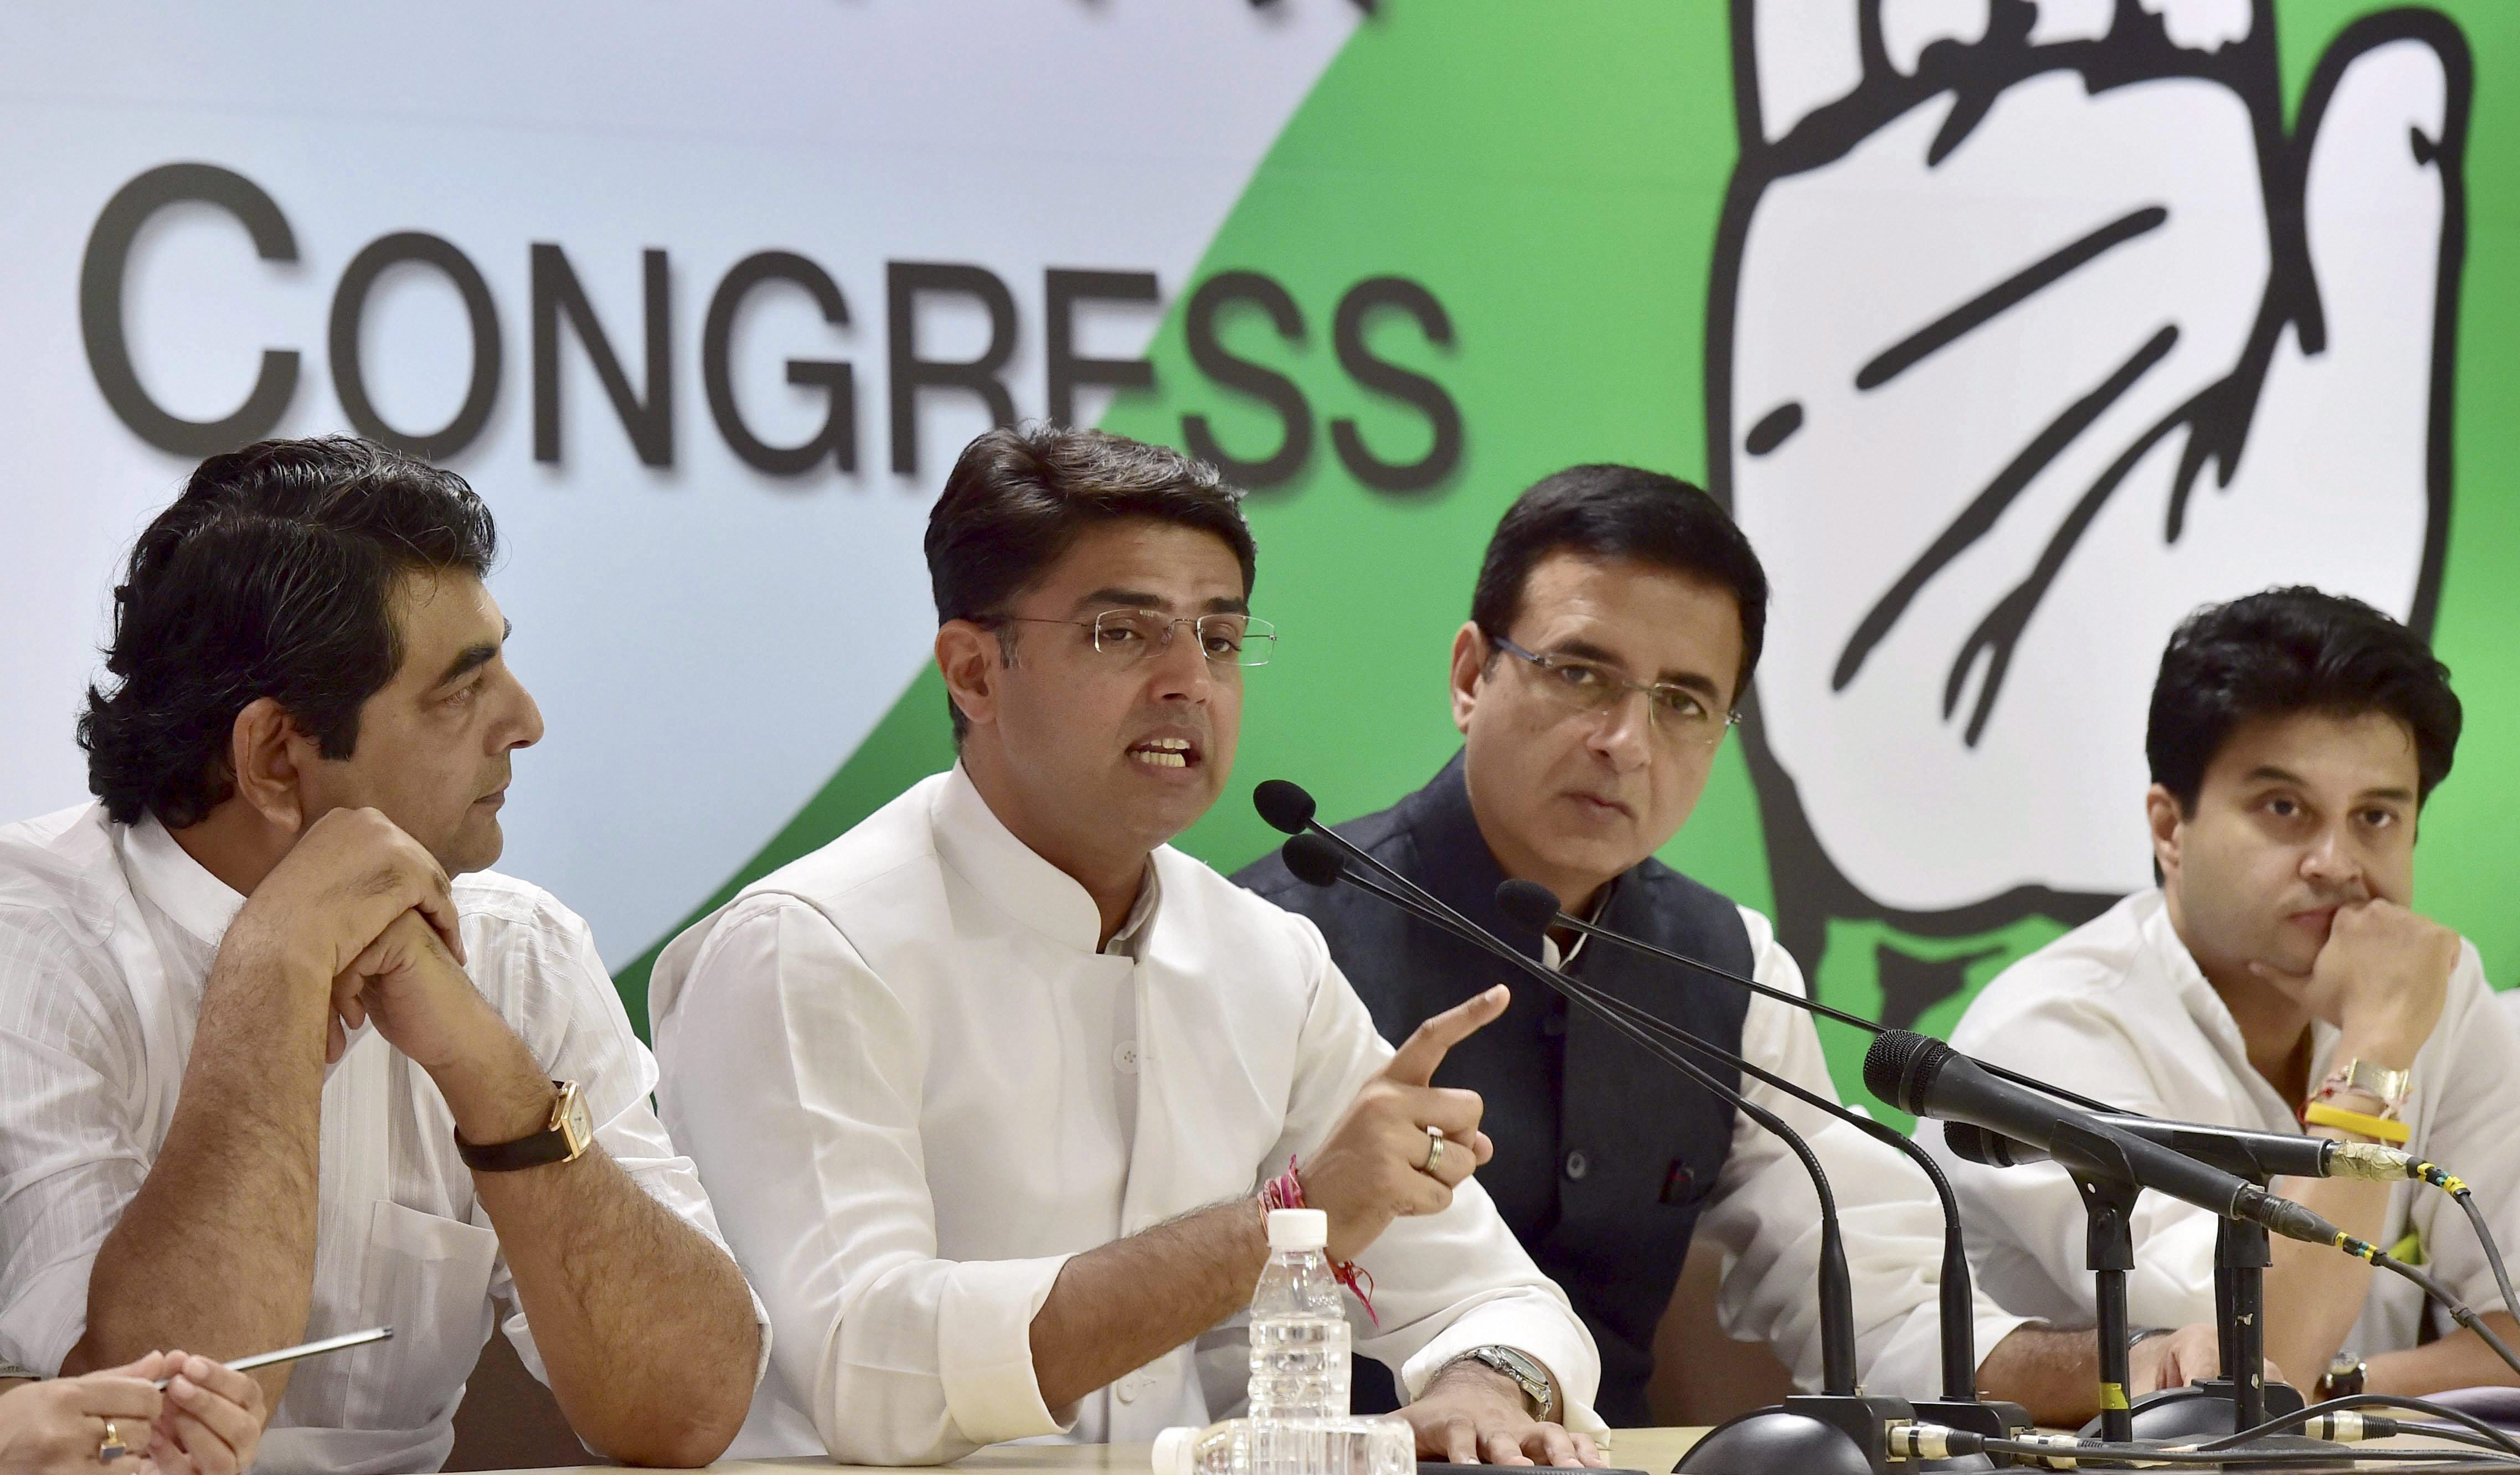 Congress announces campaign to expose 'failure' of government